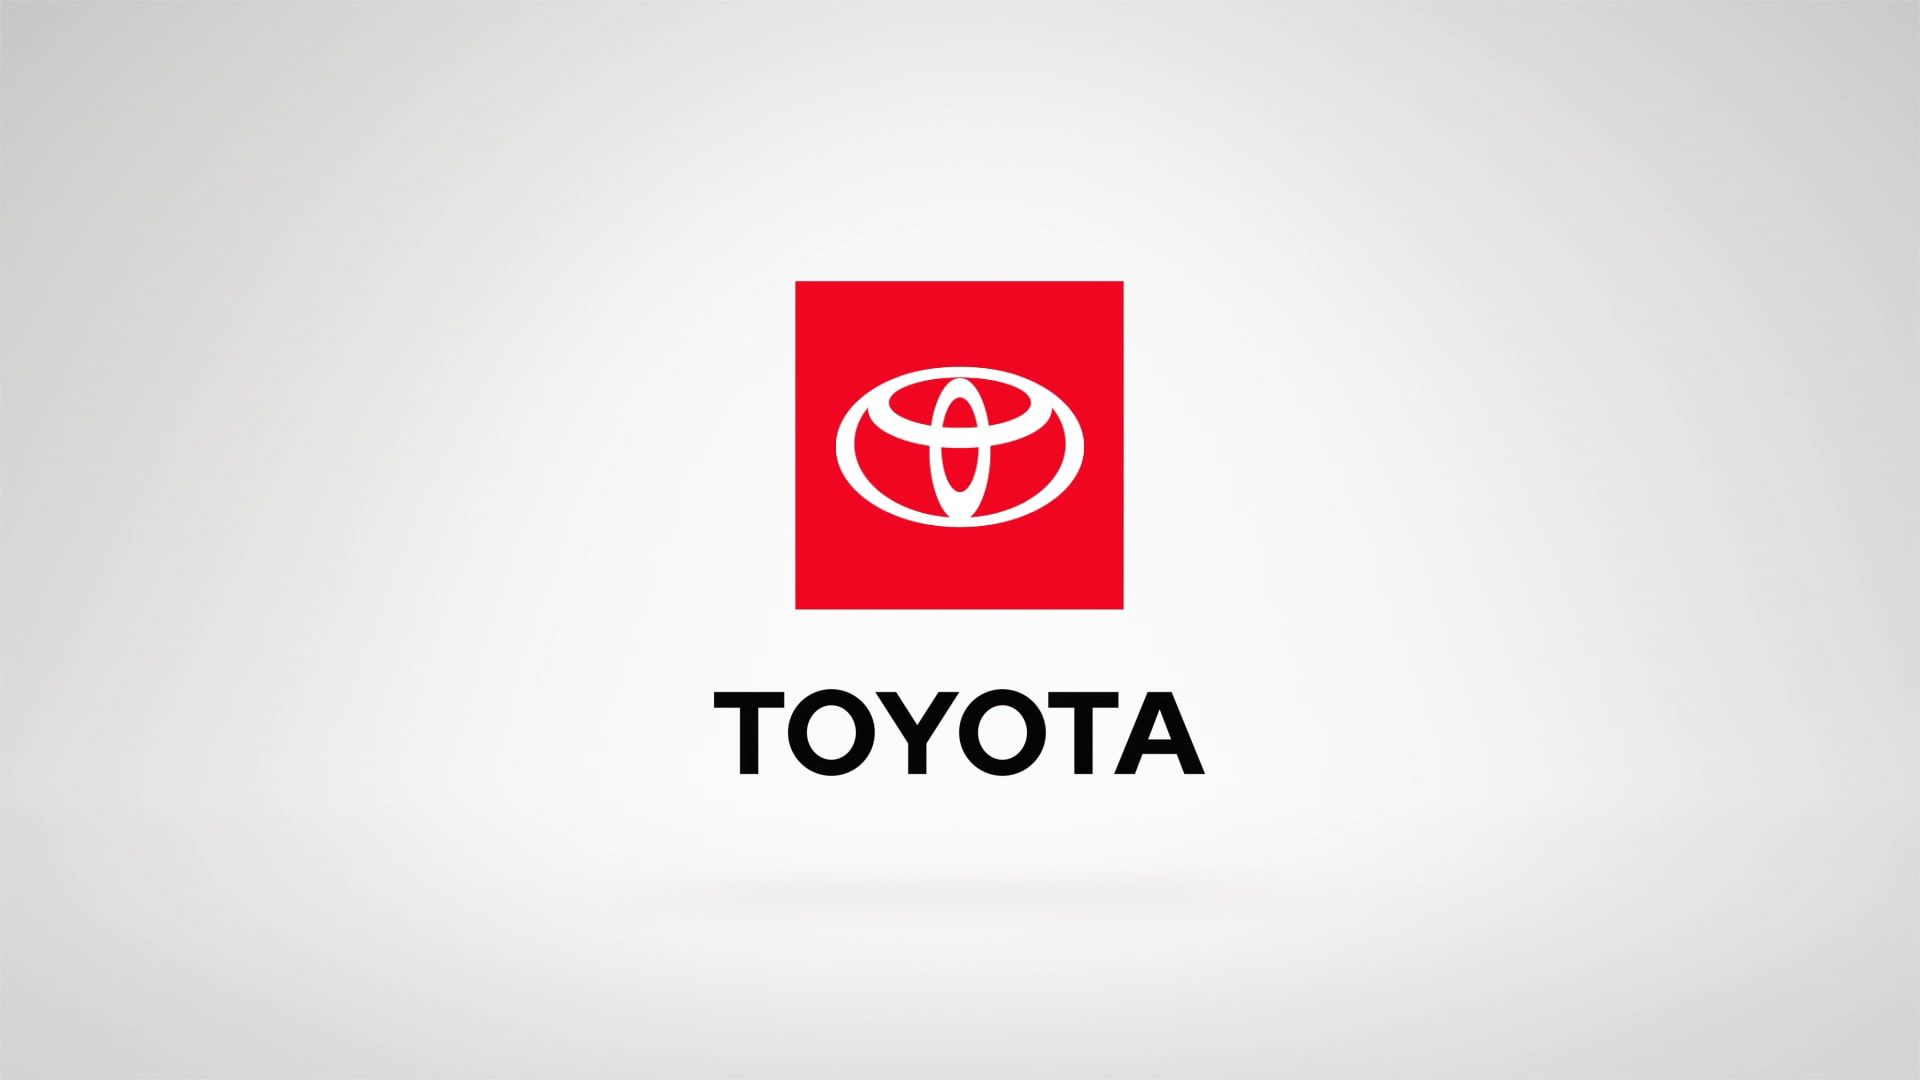 Full-screen end tag with Toyota logo on white background.